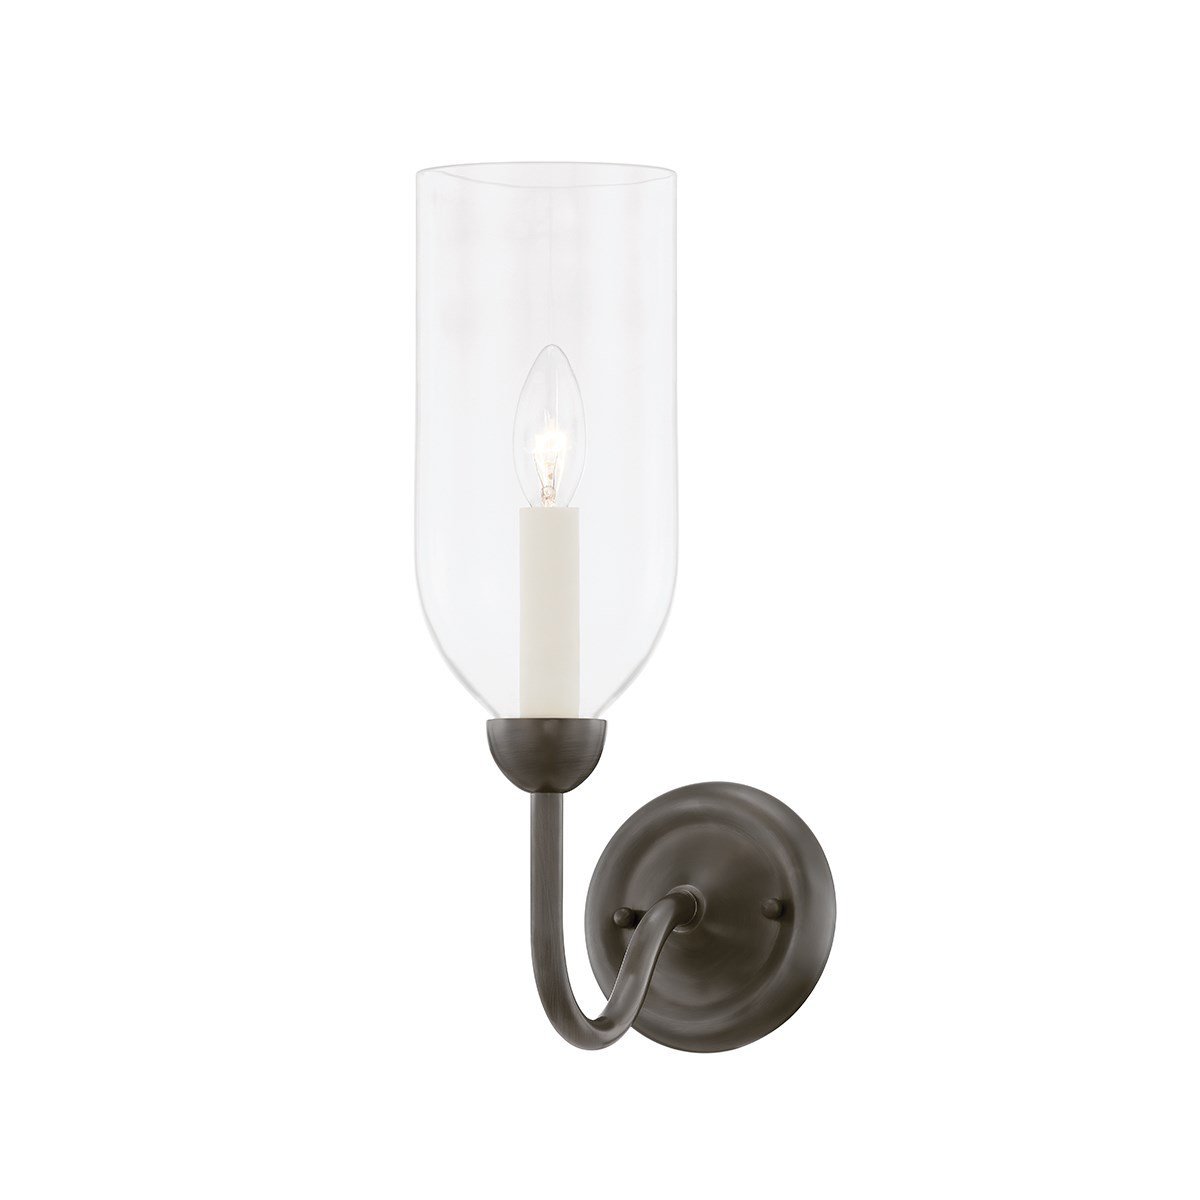 Viola Wall Sconce Historic Nickel. Left angle view.